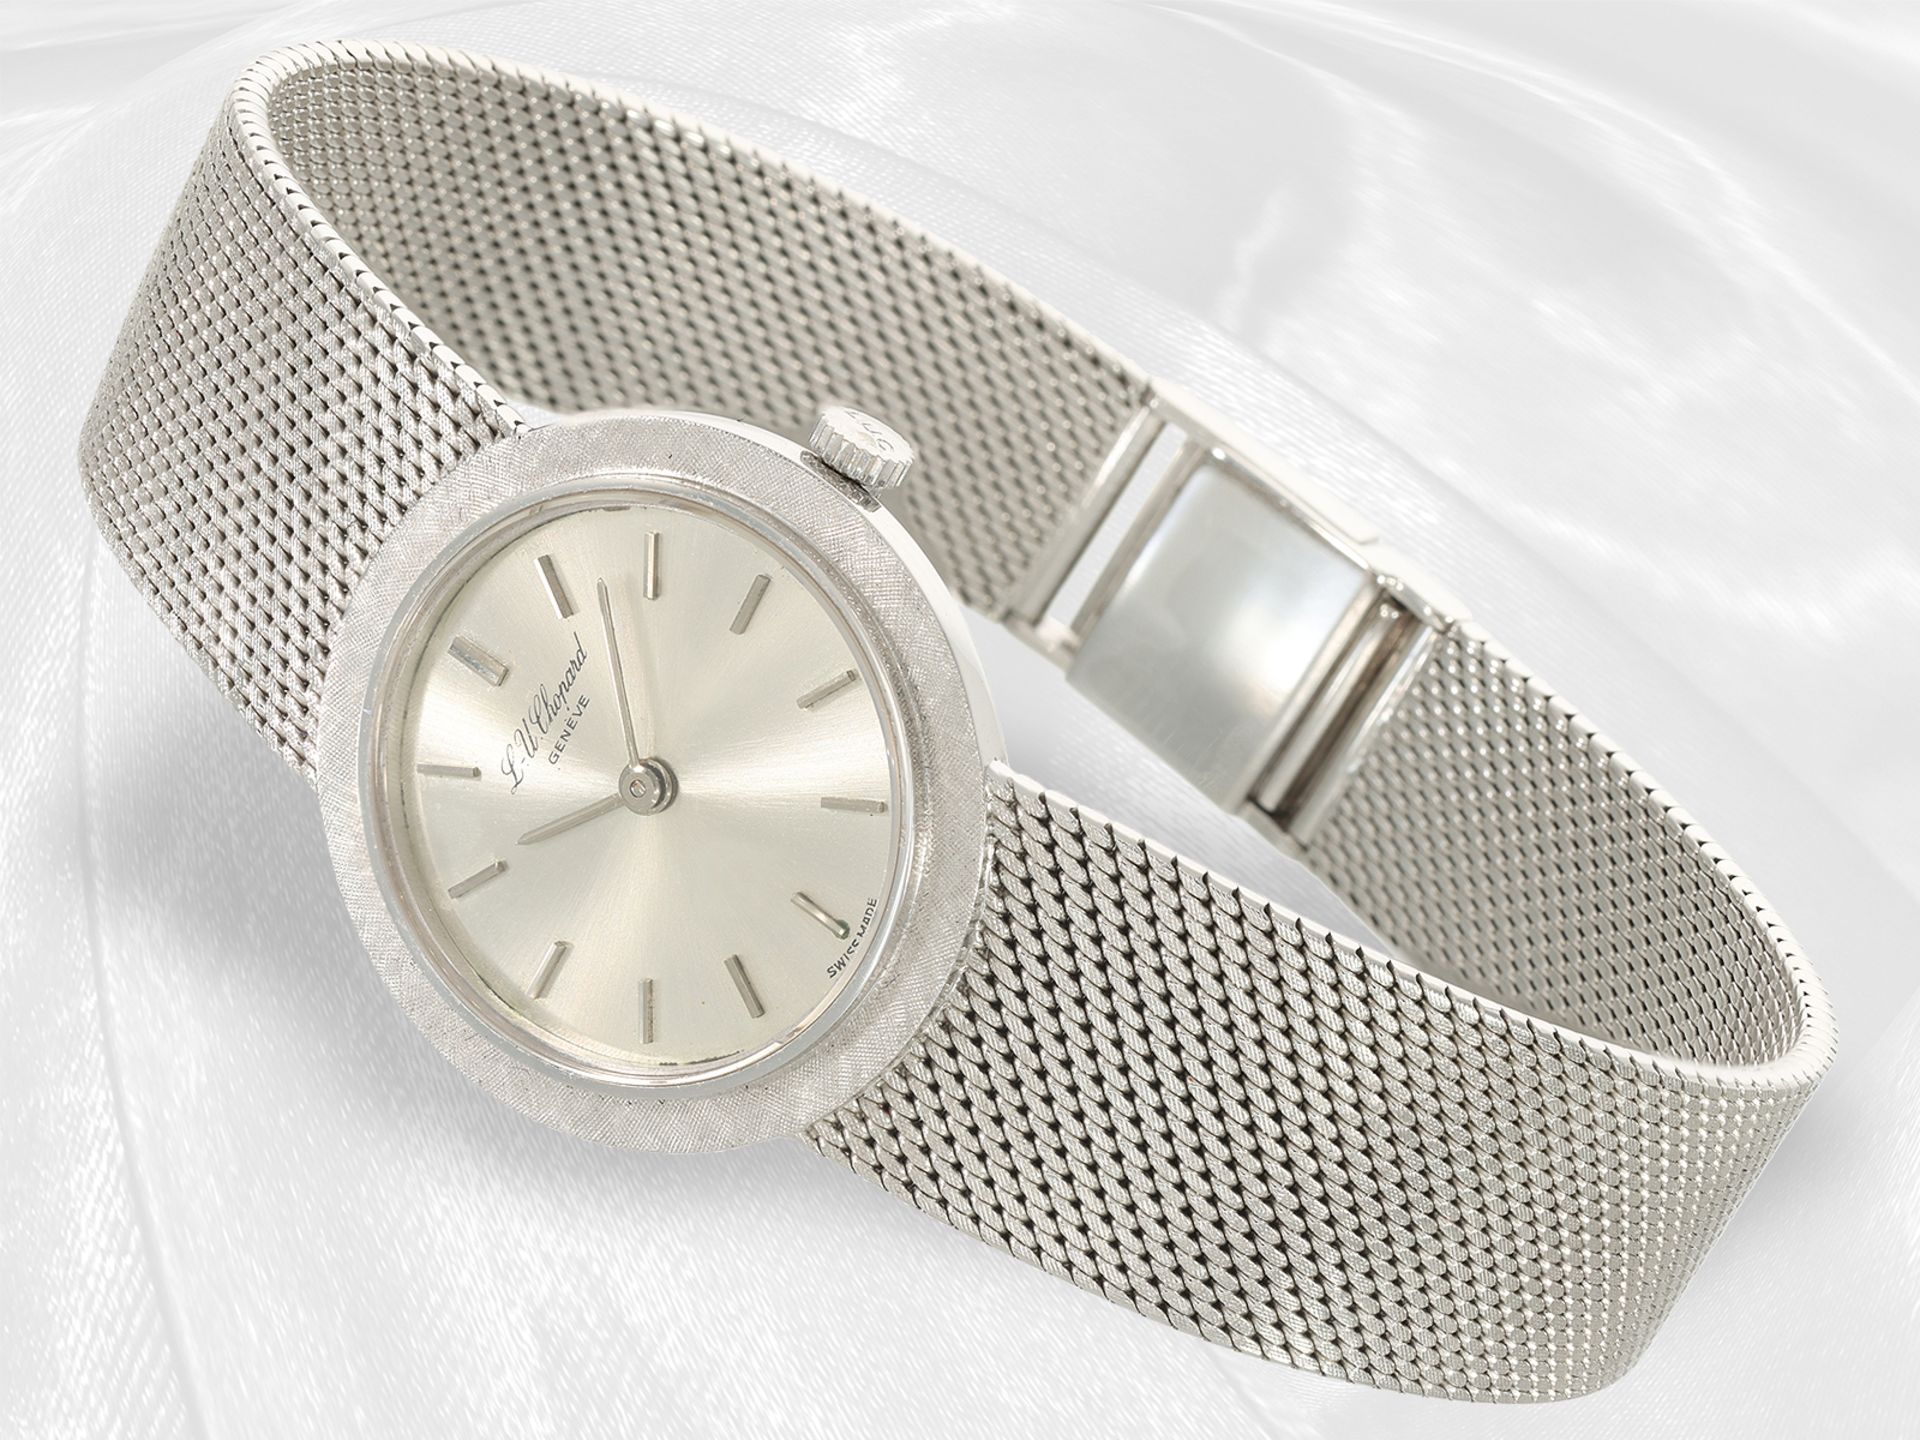 Wristwatch: fine, white gold vintage ladies' watch by Chopard, manual winding, 18K white gold - Image 3 of 5